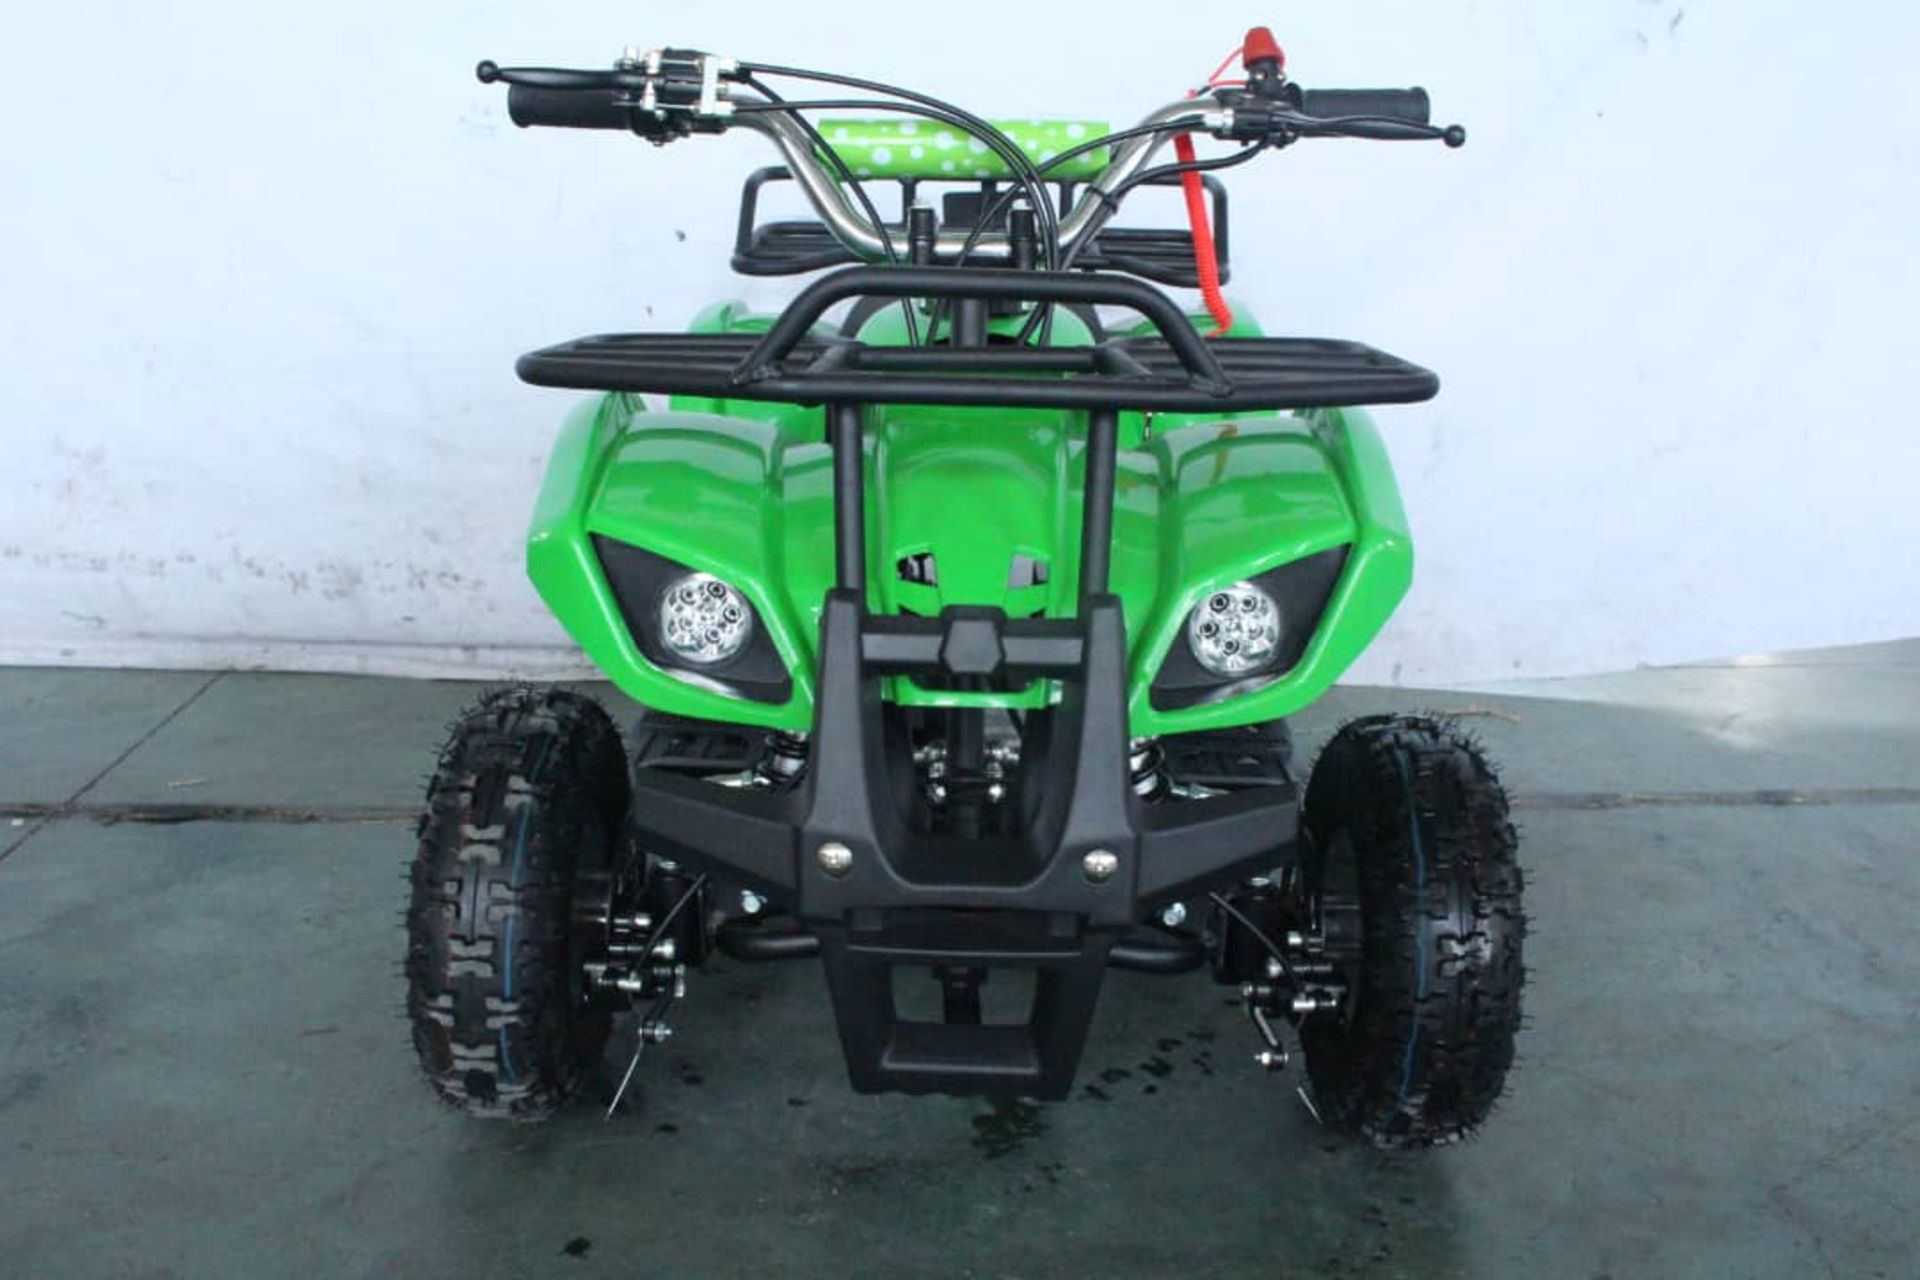 + VAT Brand New 50cc Mini Quad Bike FRM - Colours May Vary - Picture May Vary From Actual Item - Bild 8 aus 9